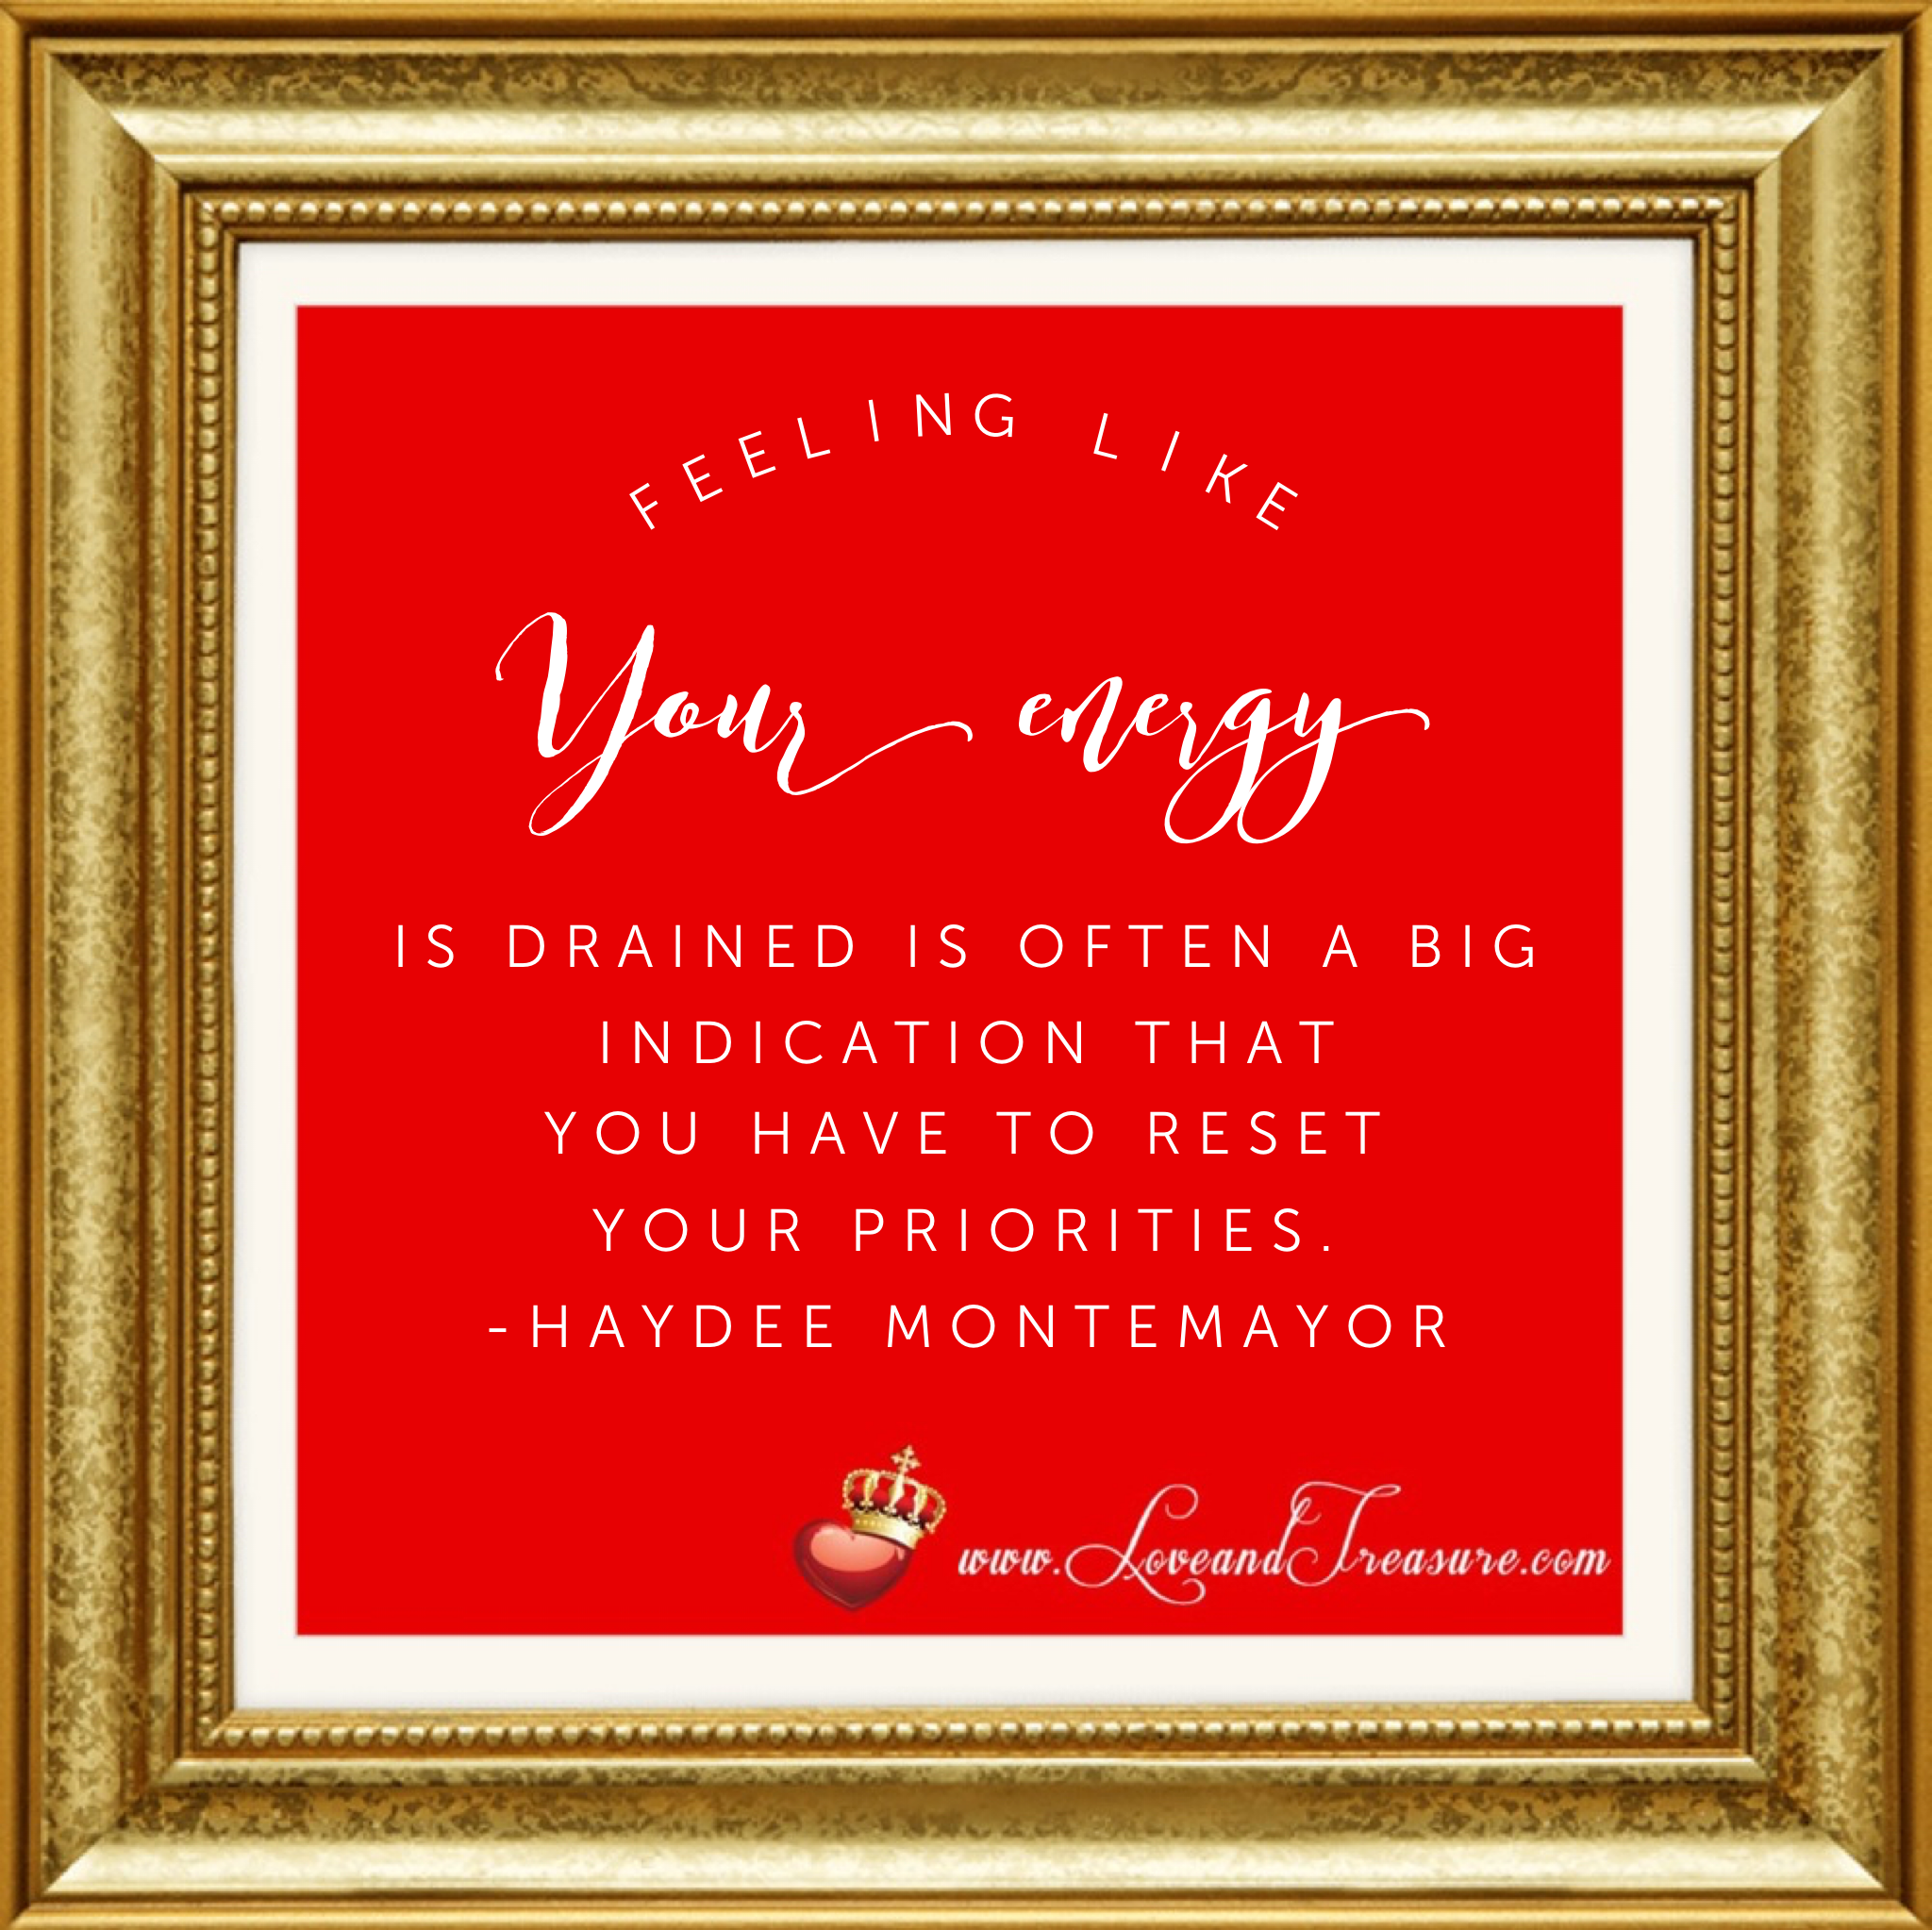  "Feeling like your energy is drained is often a big indication that you have to reset your priorities." quotation by Haydee Montemayor from Love and Treasure www.loveandtreasure.com